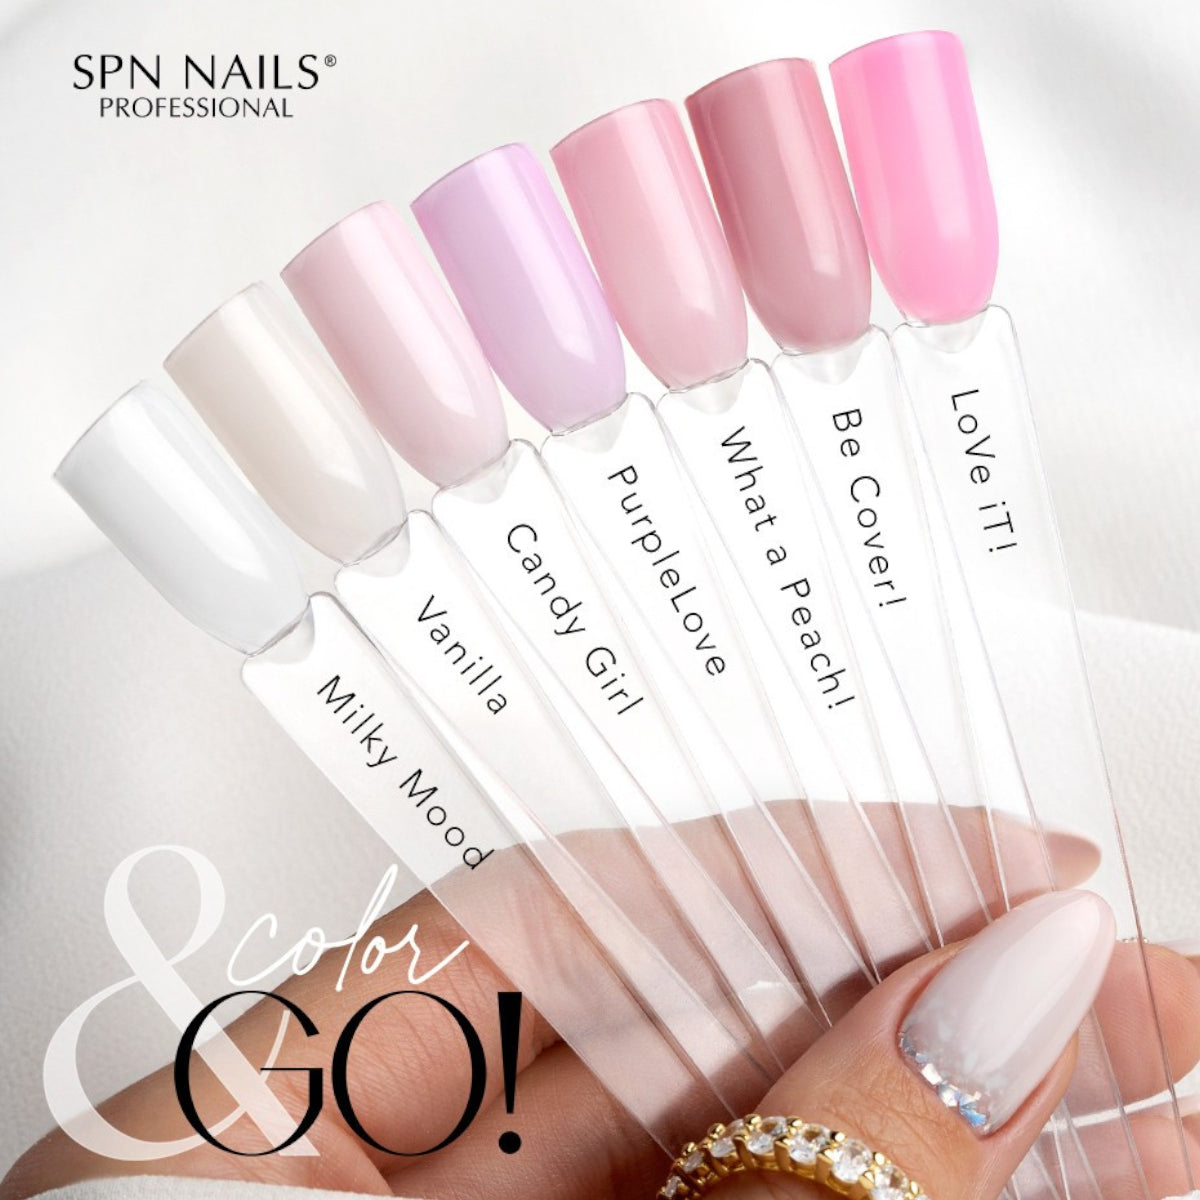 SPN Nails Rubber Base COLOR & GO! Milky Mood Series Swatch